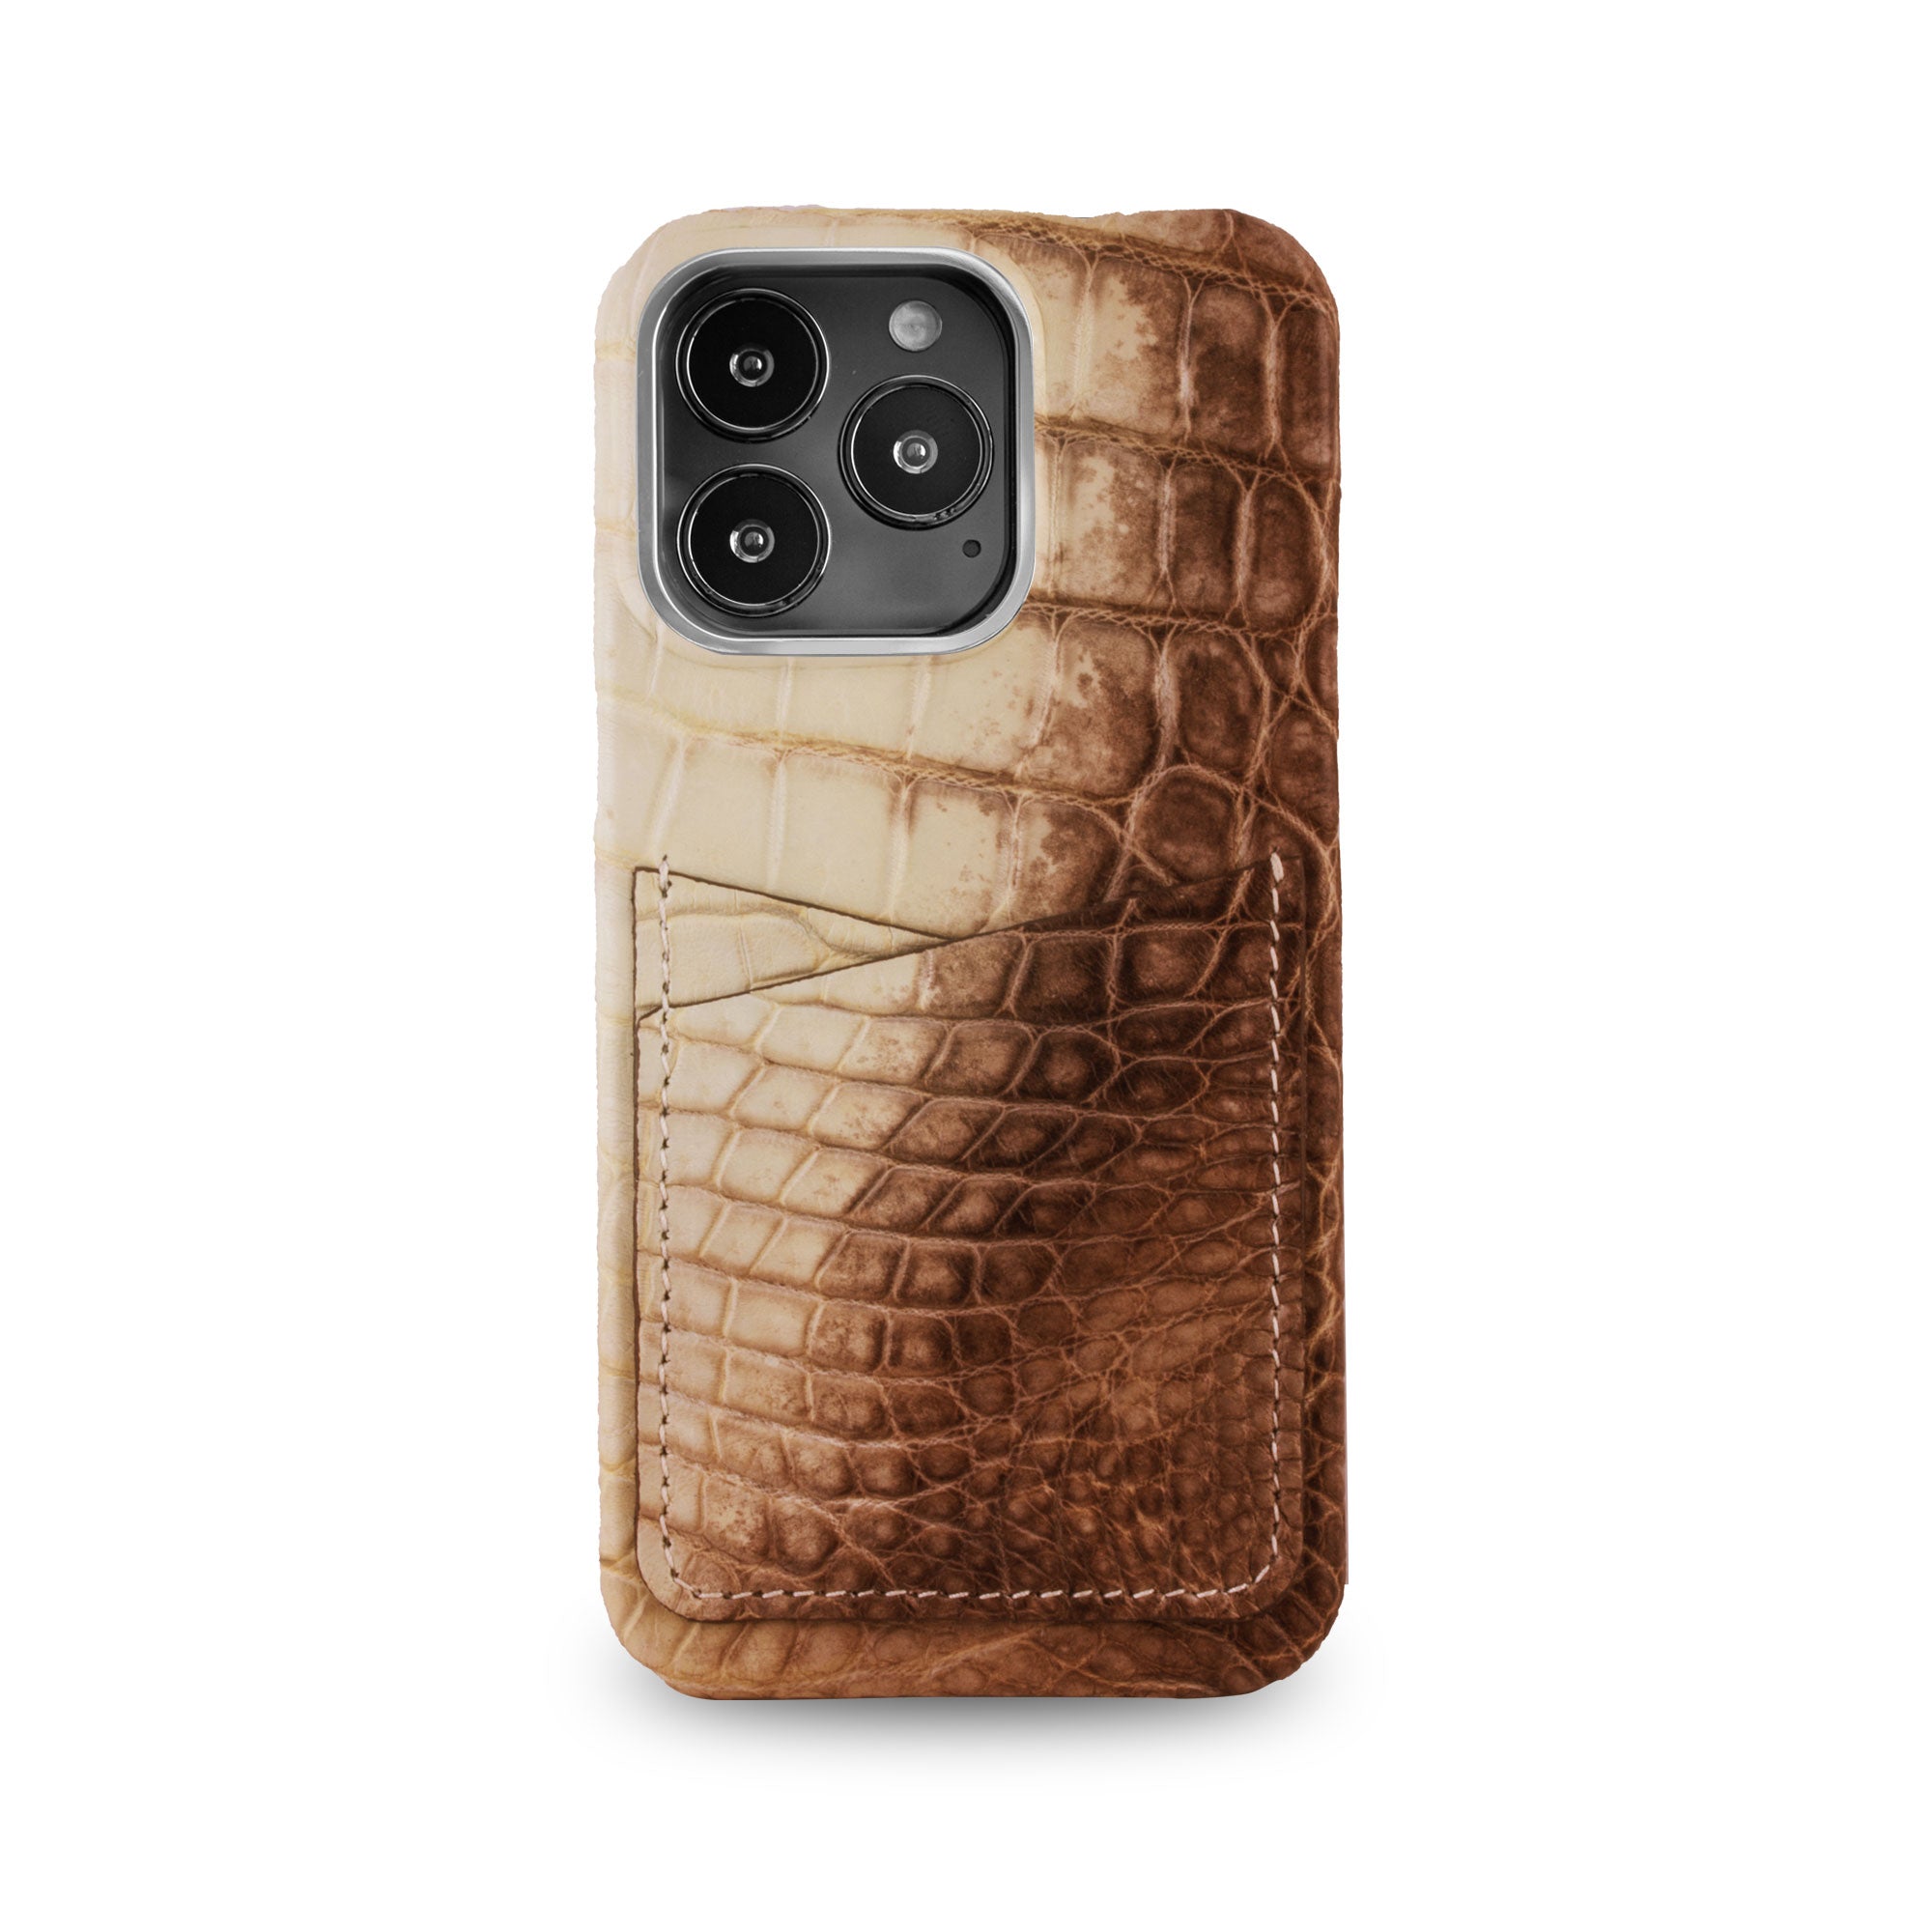 Leather iPhone HIMALAYA "Card case" / cover - iPhone 13 ( Pro / Max ) - Genuine alligator